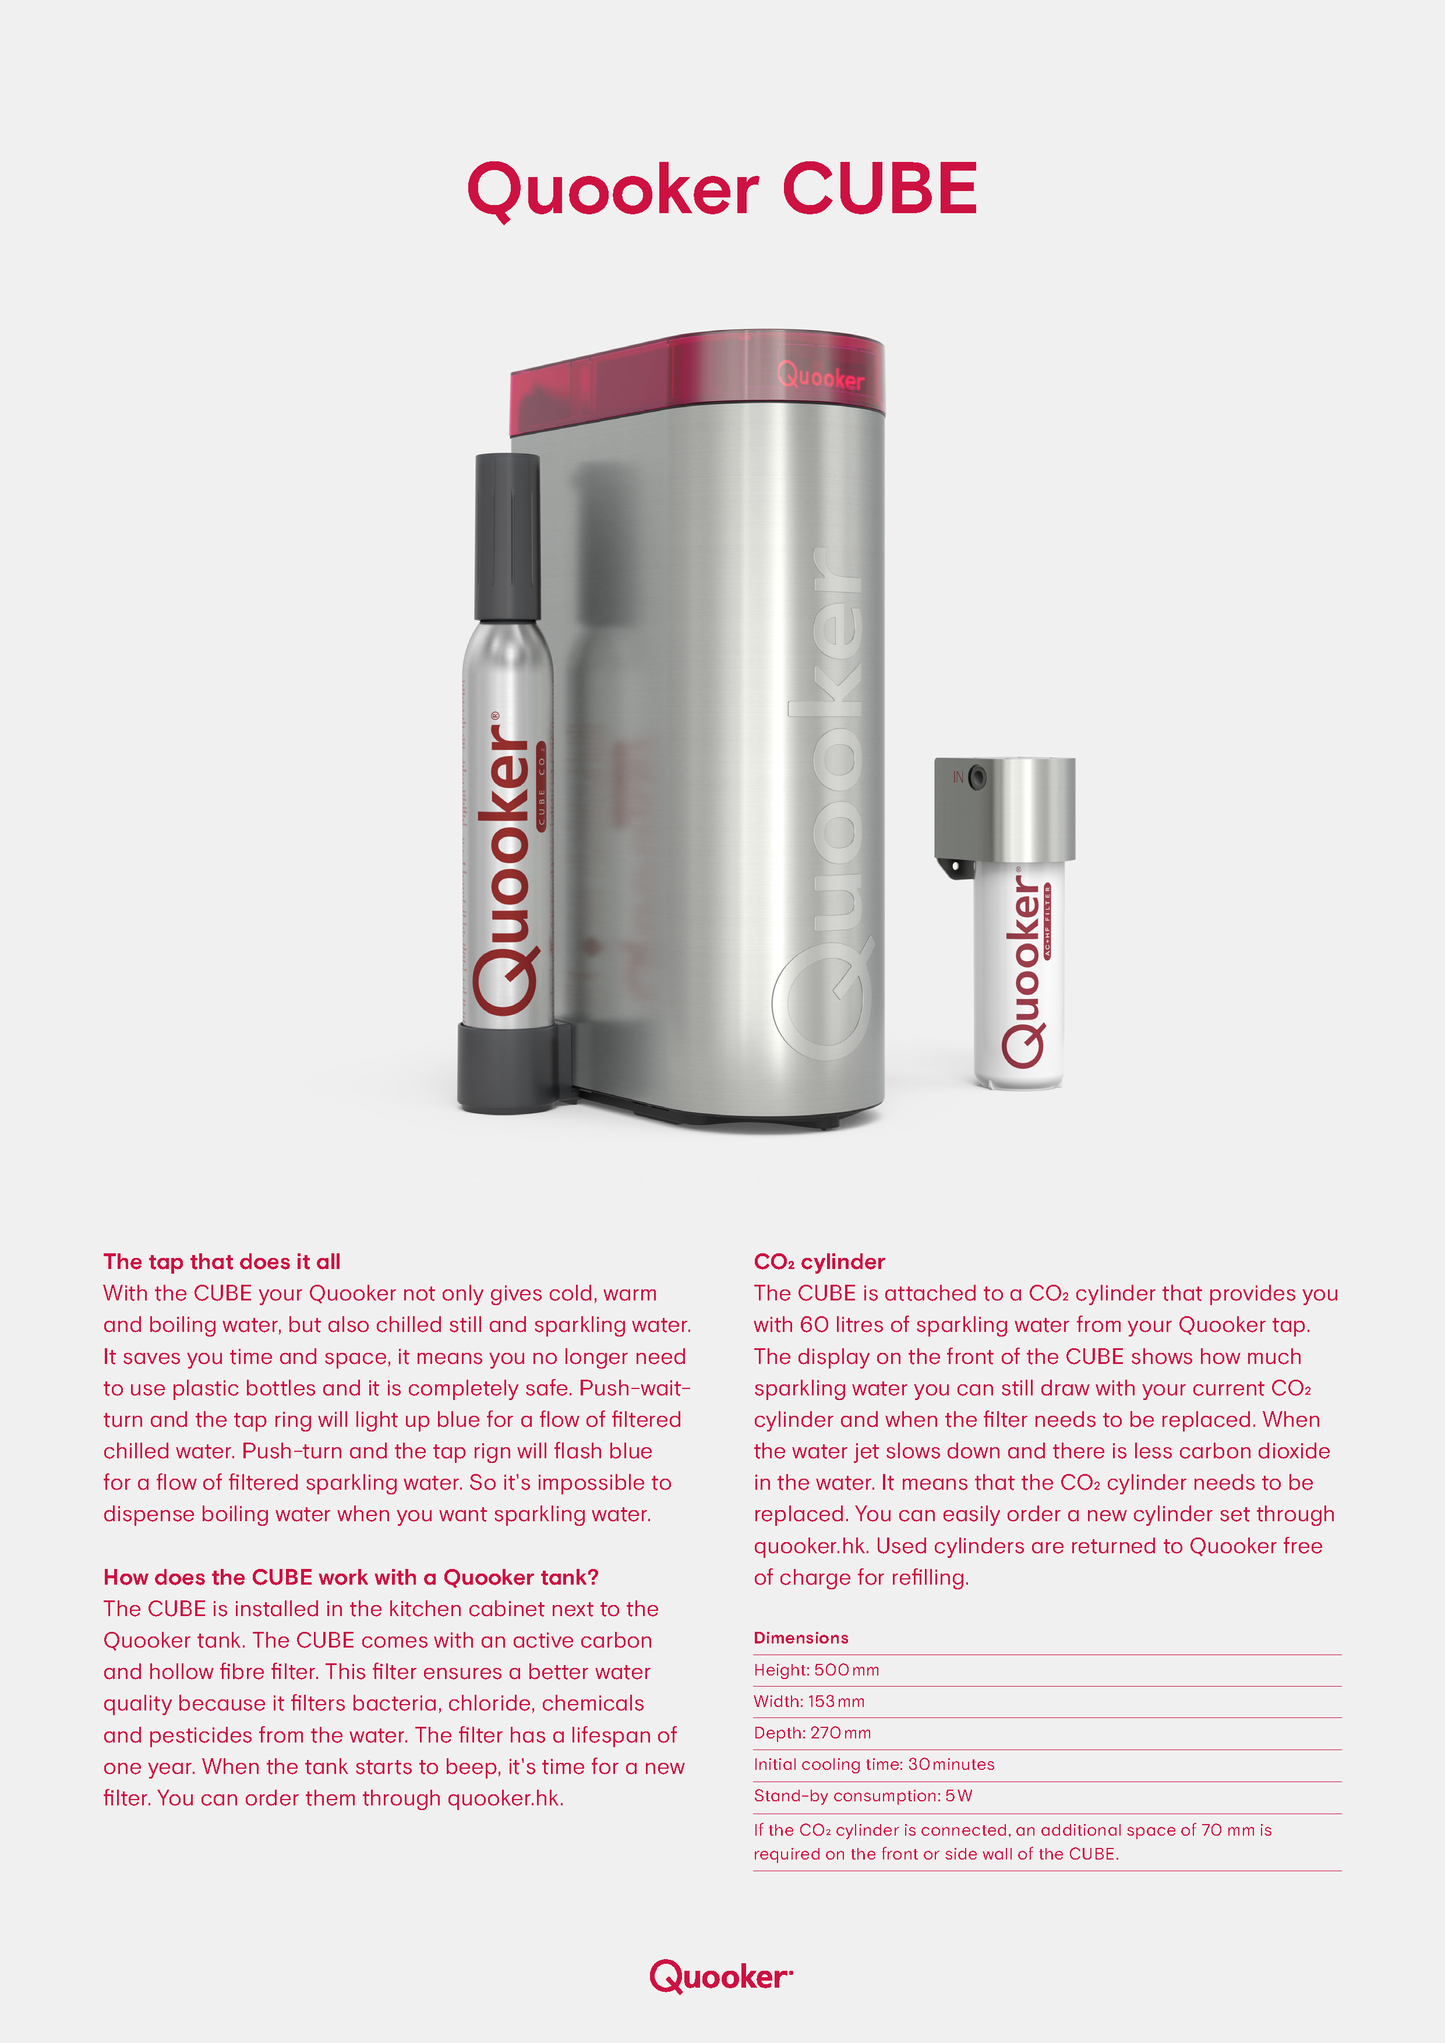 【QUOOKER】FLEX 滾水水龍頭 Instant Hot /or Warm /or Chilled /or Sparkling Water Tap | From Netherlands |